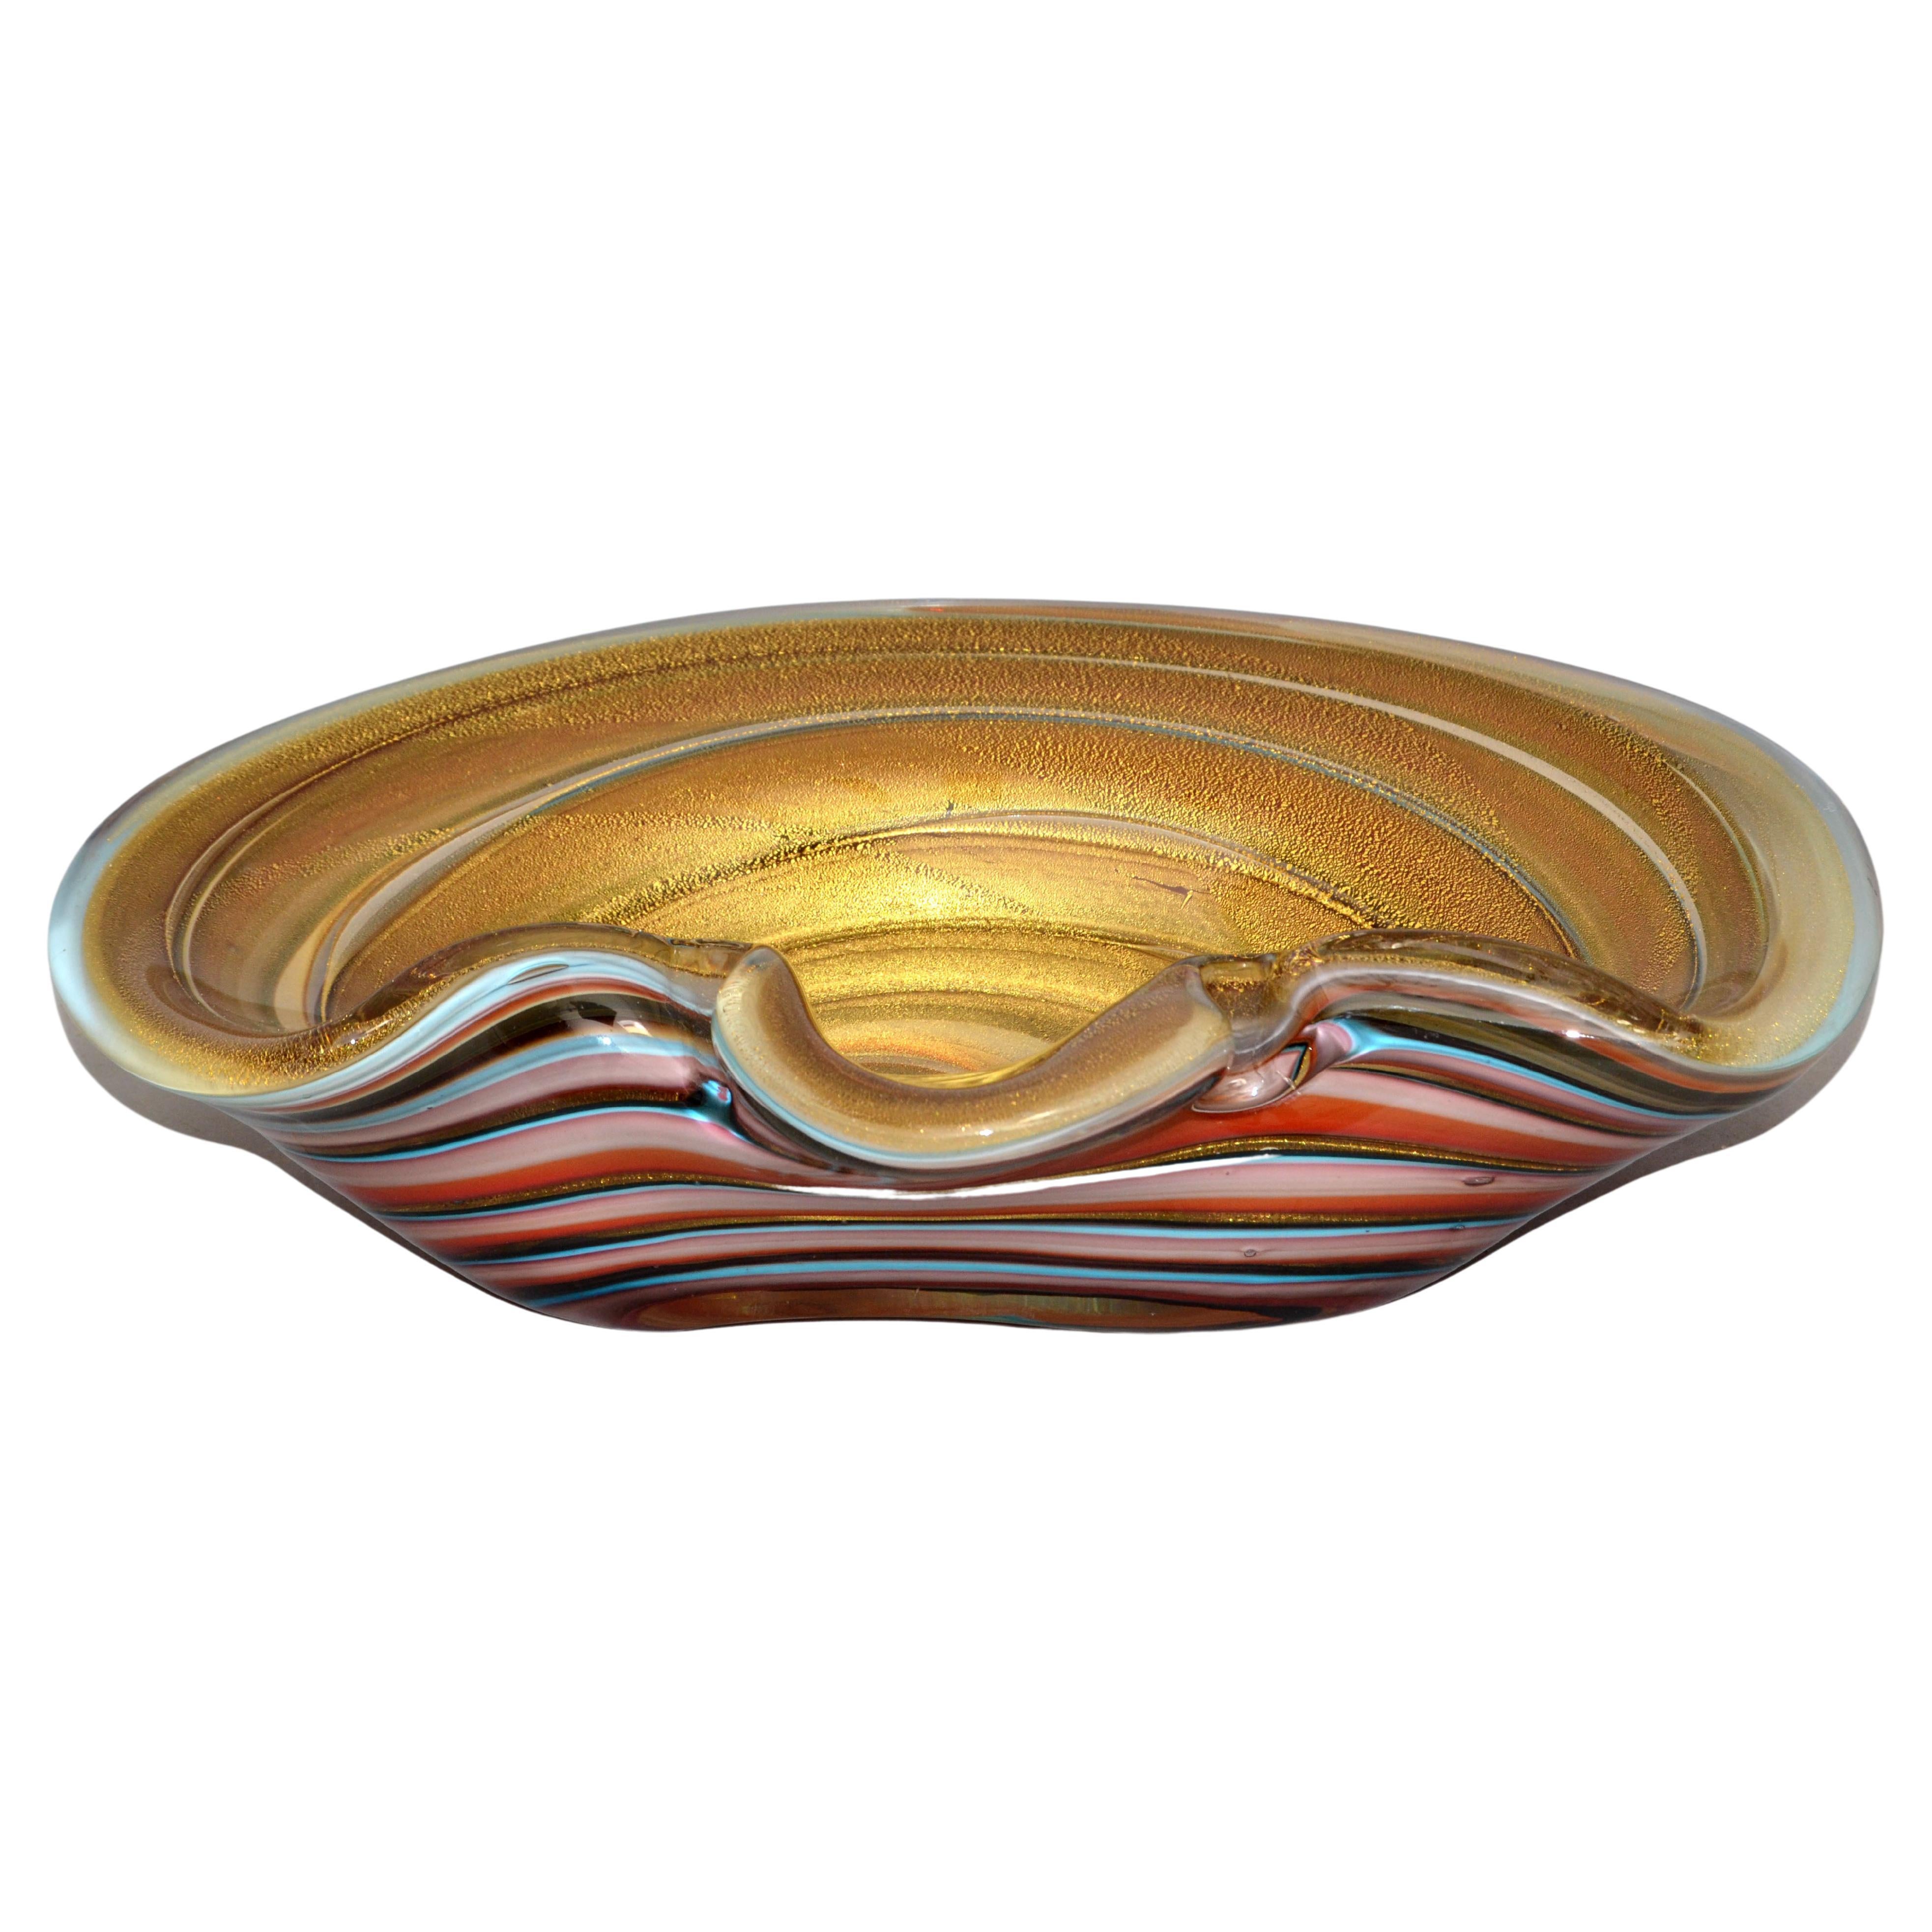 Large Finest Murano Glass Clam Shell Swirl Gold Dust Flecks Bowl, Catchall Italy For Sale